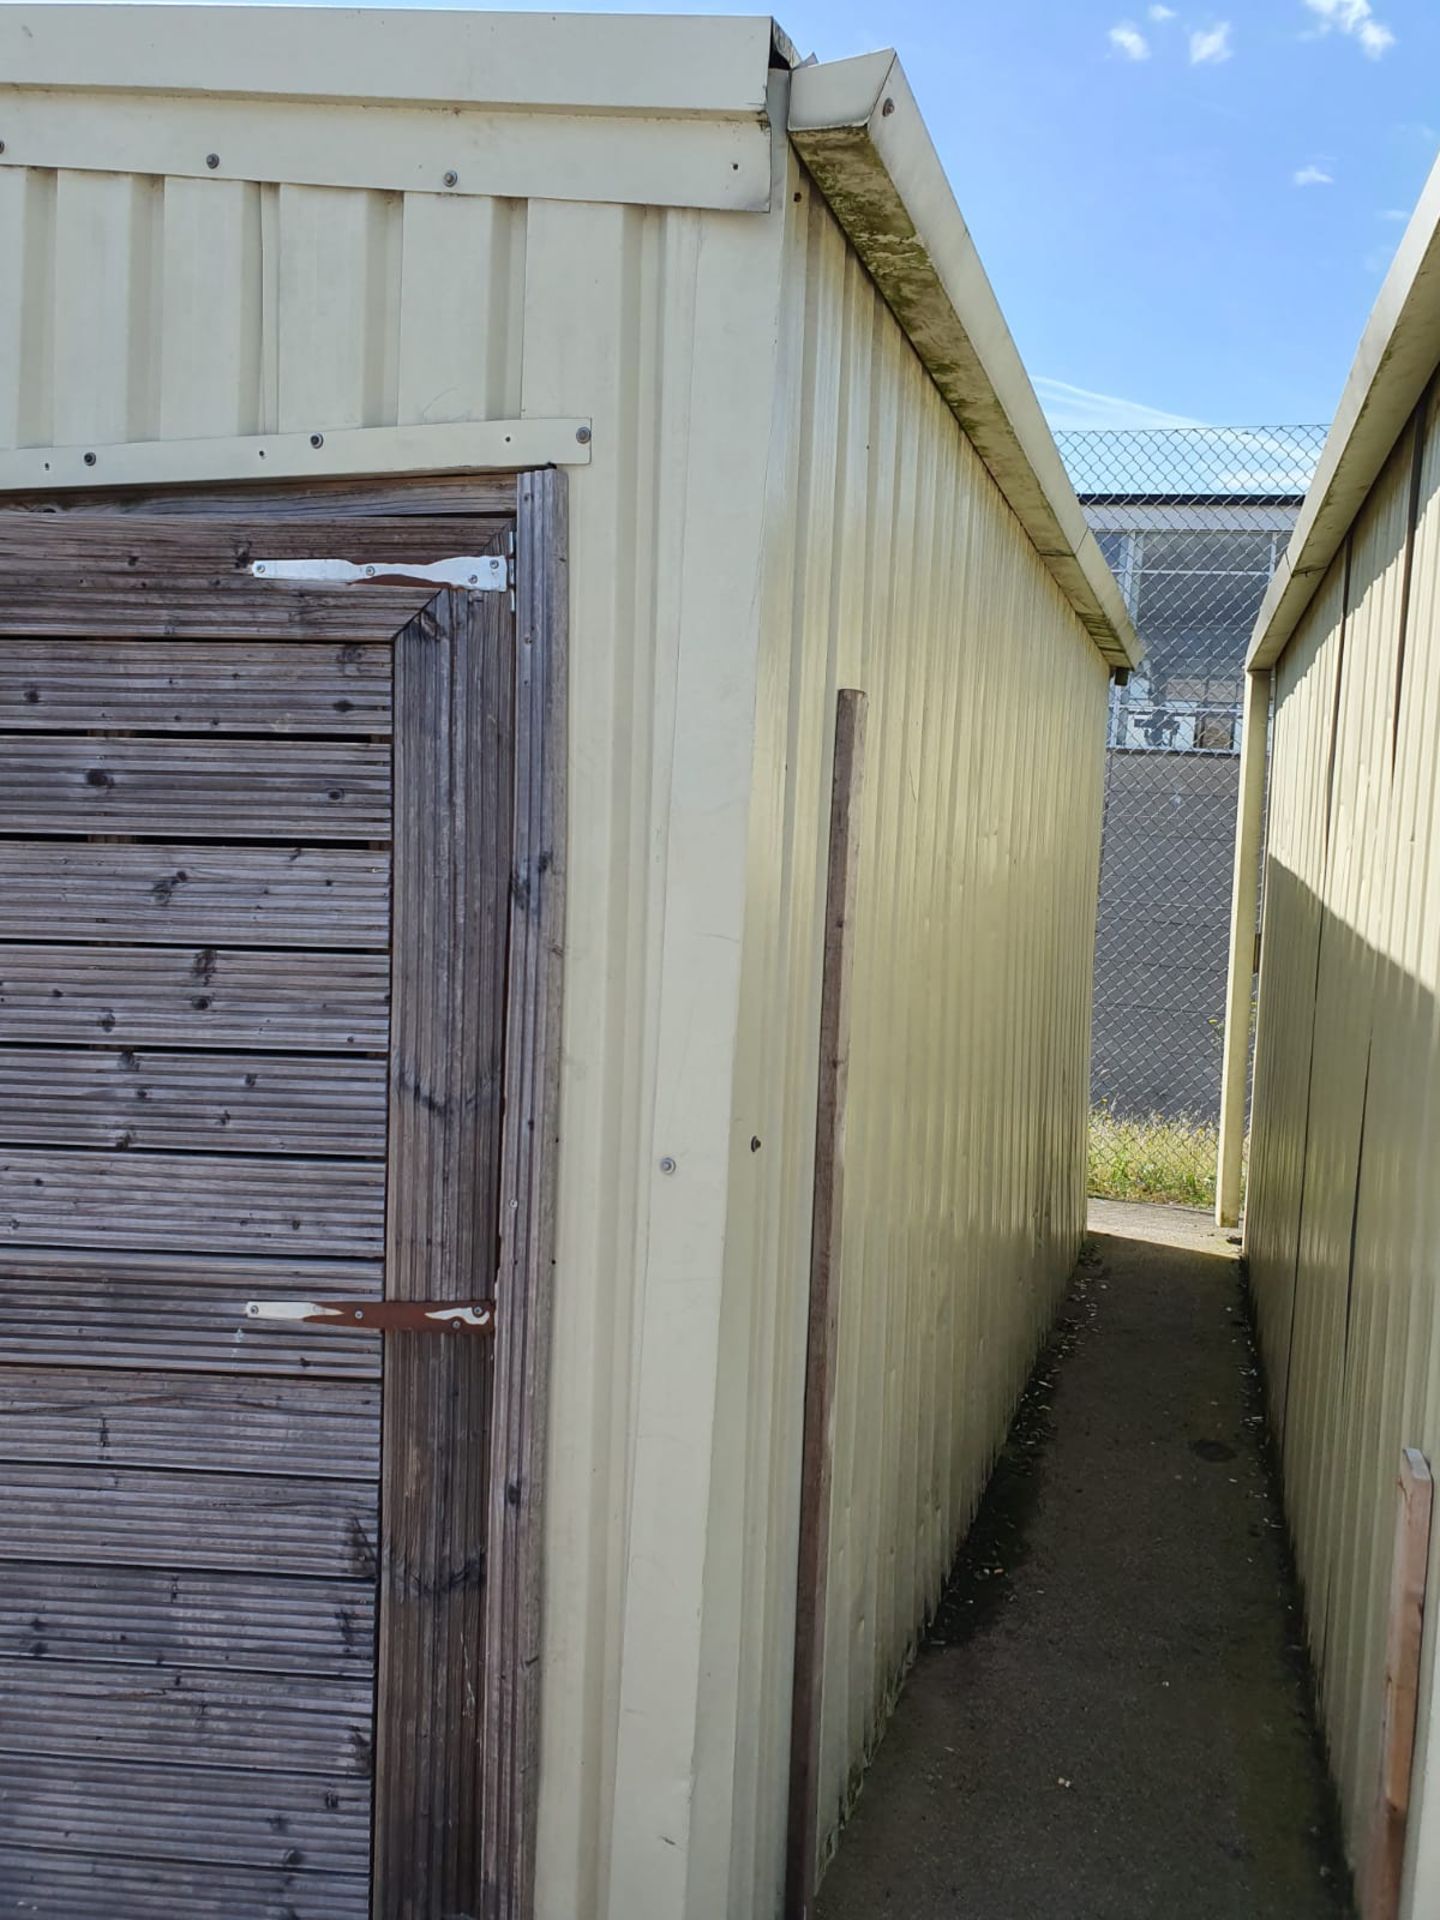 1 x Large Steel Storage Shed Container With Four Wooden Folding Doors - Approx Dimensions 5M x 5M - Image 16 of 18